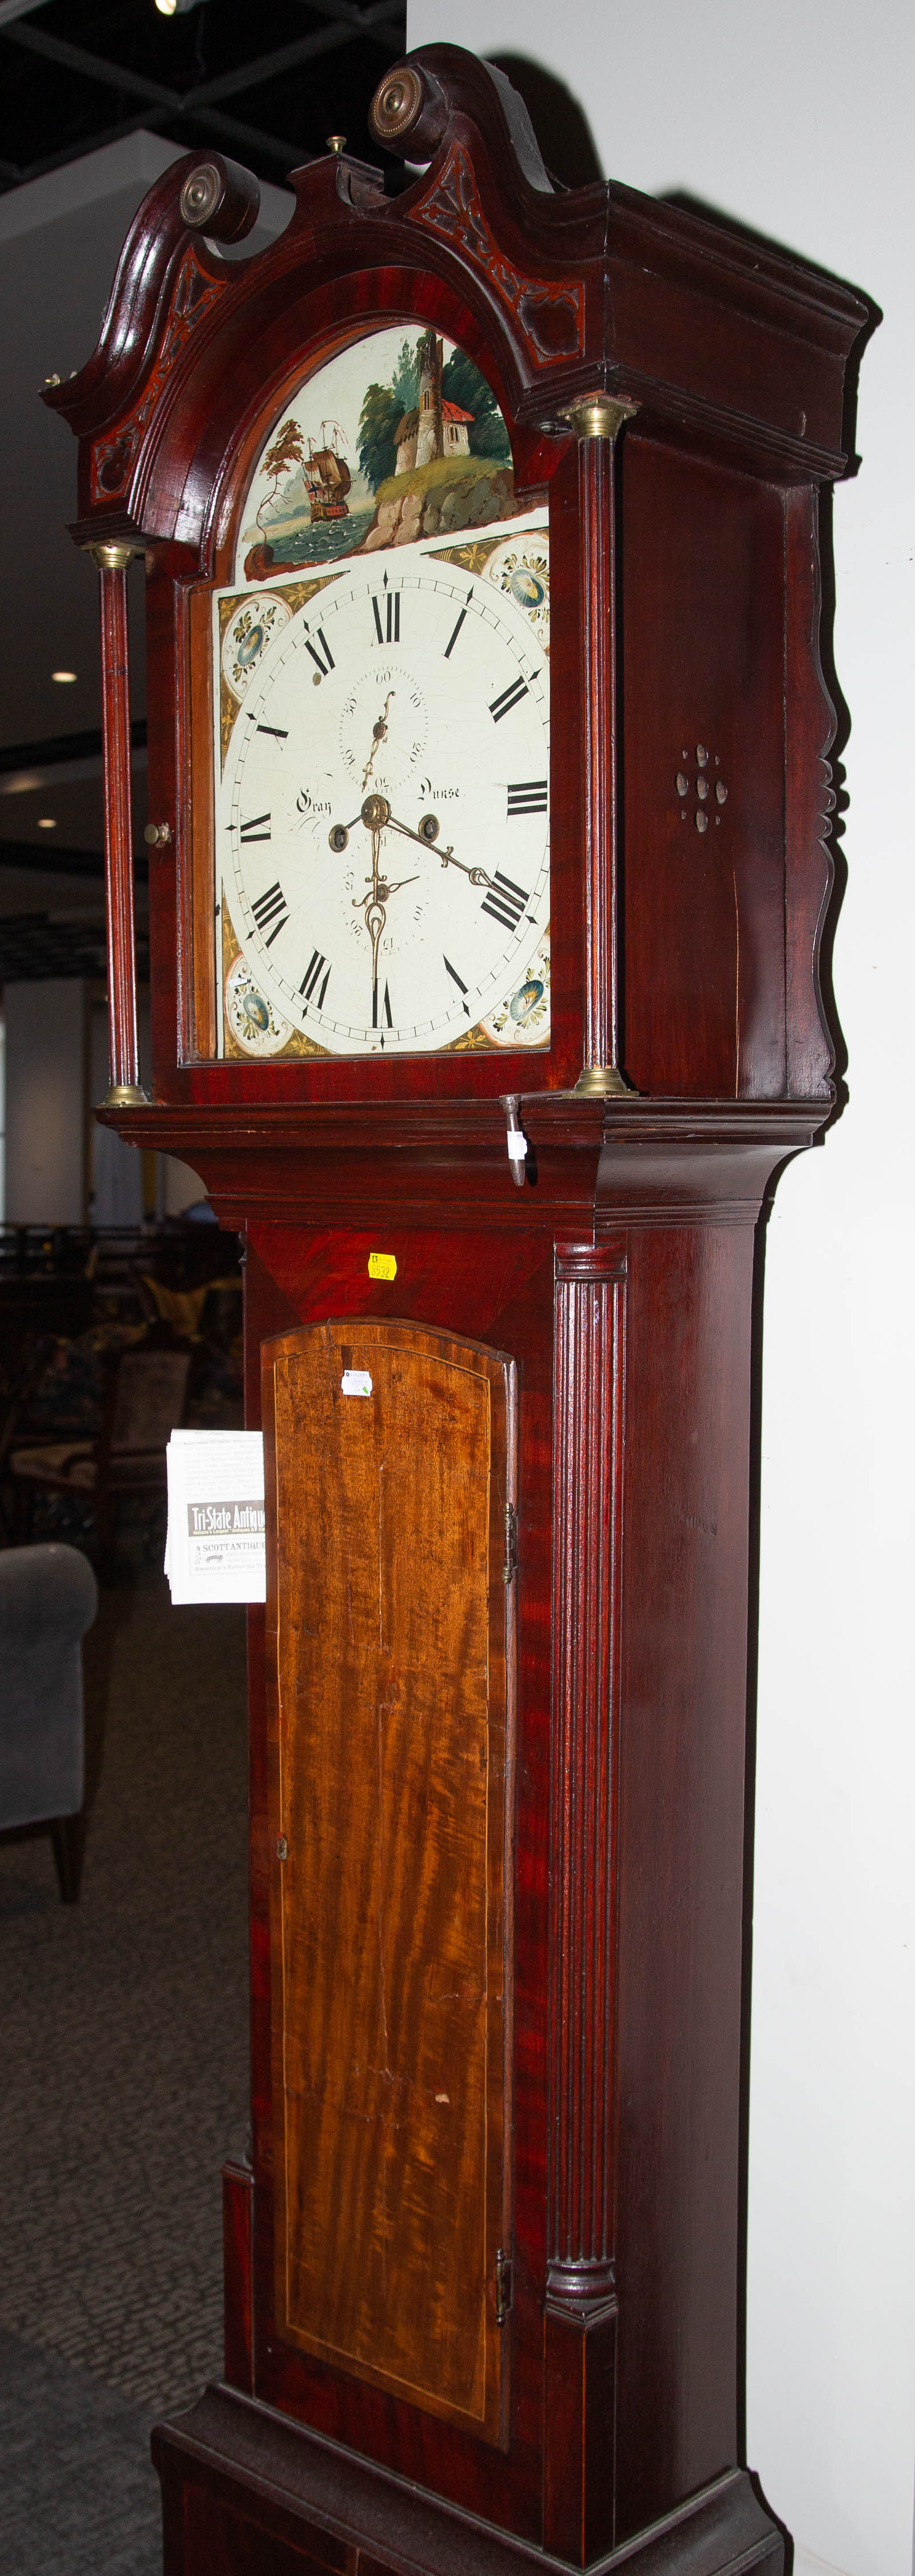 GEORGIAN CHIPPENDALE STYLE TALL 333f69